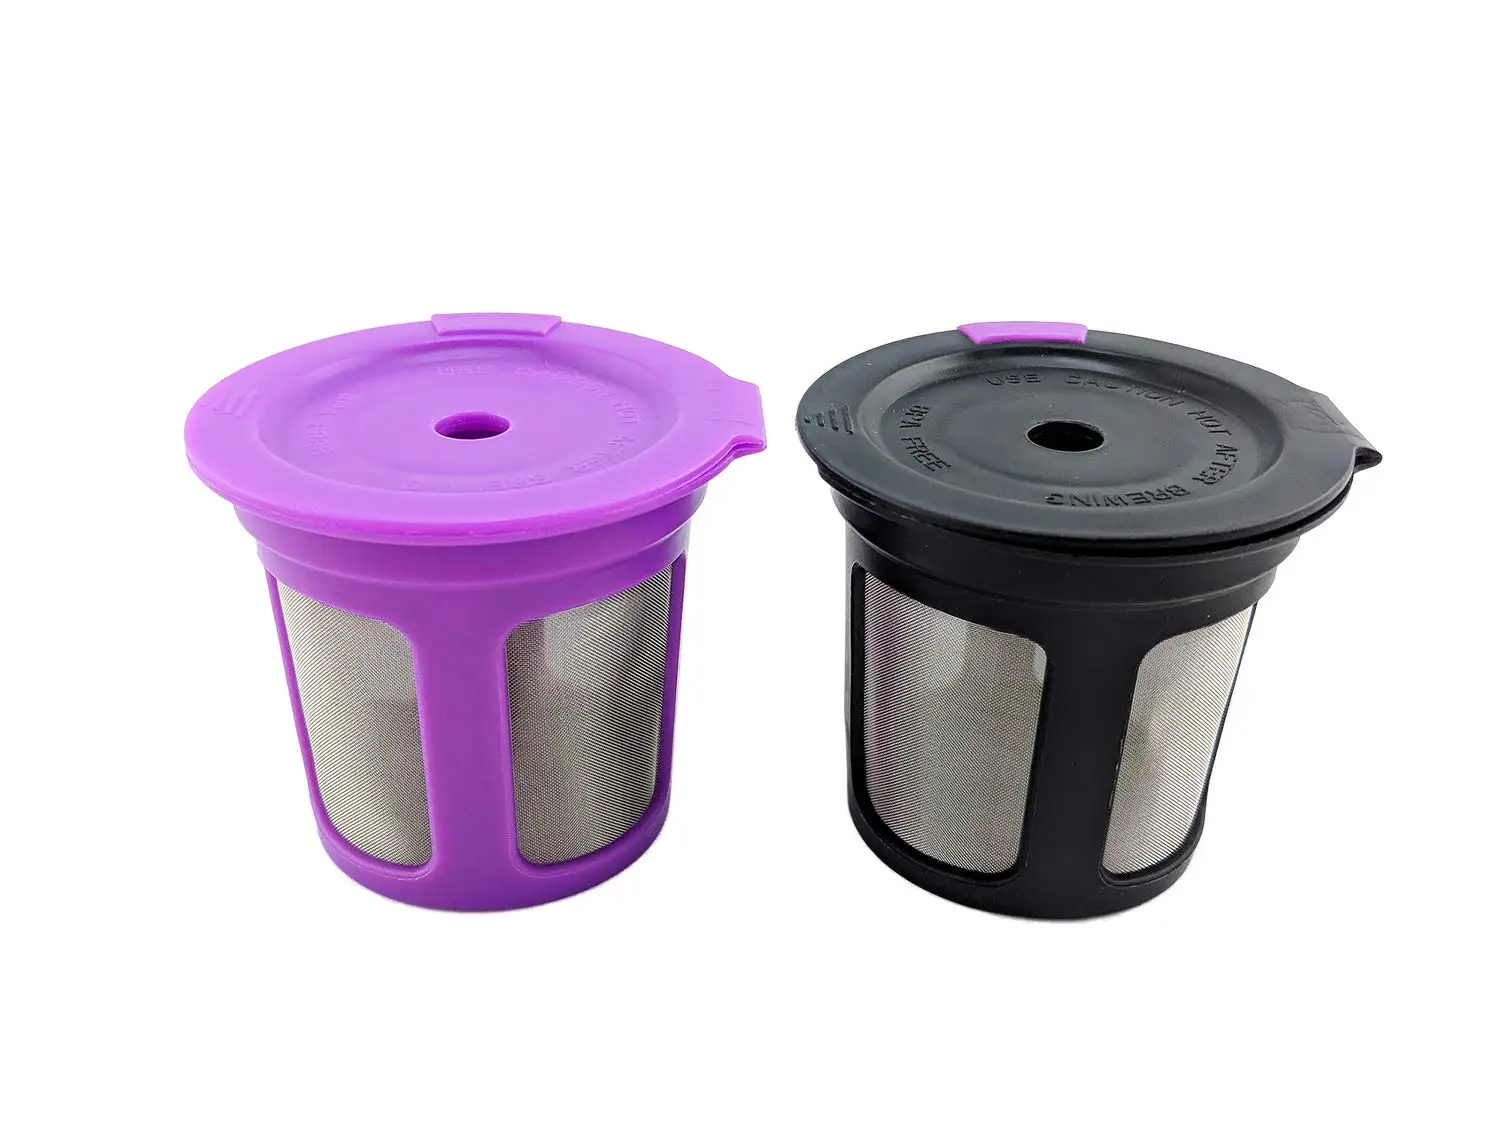 Filter cup